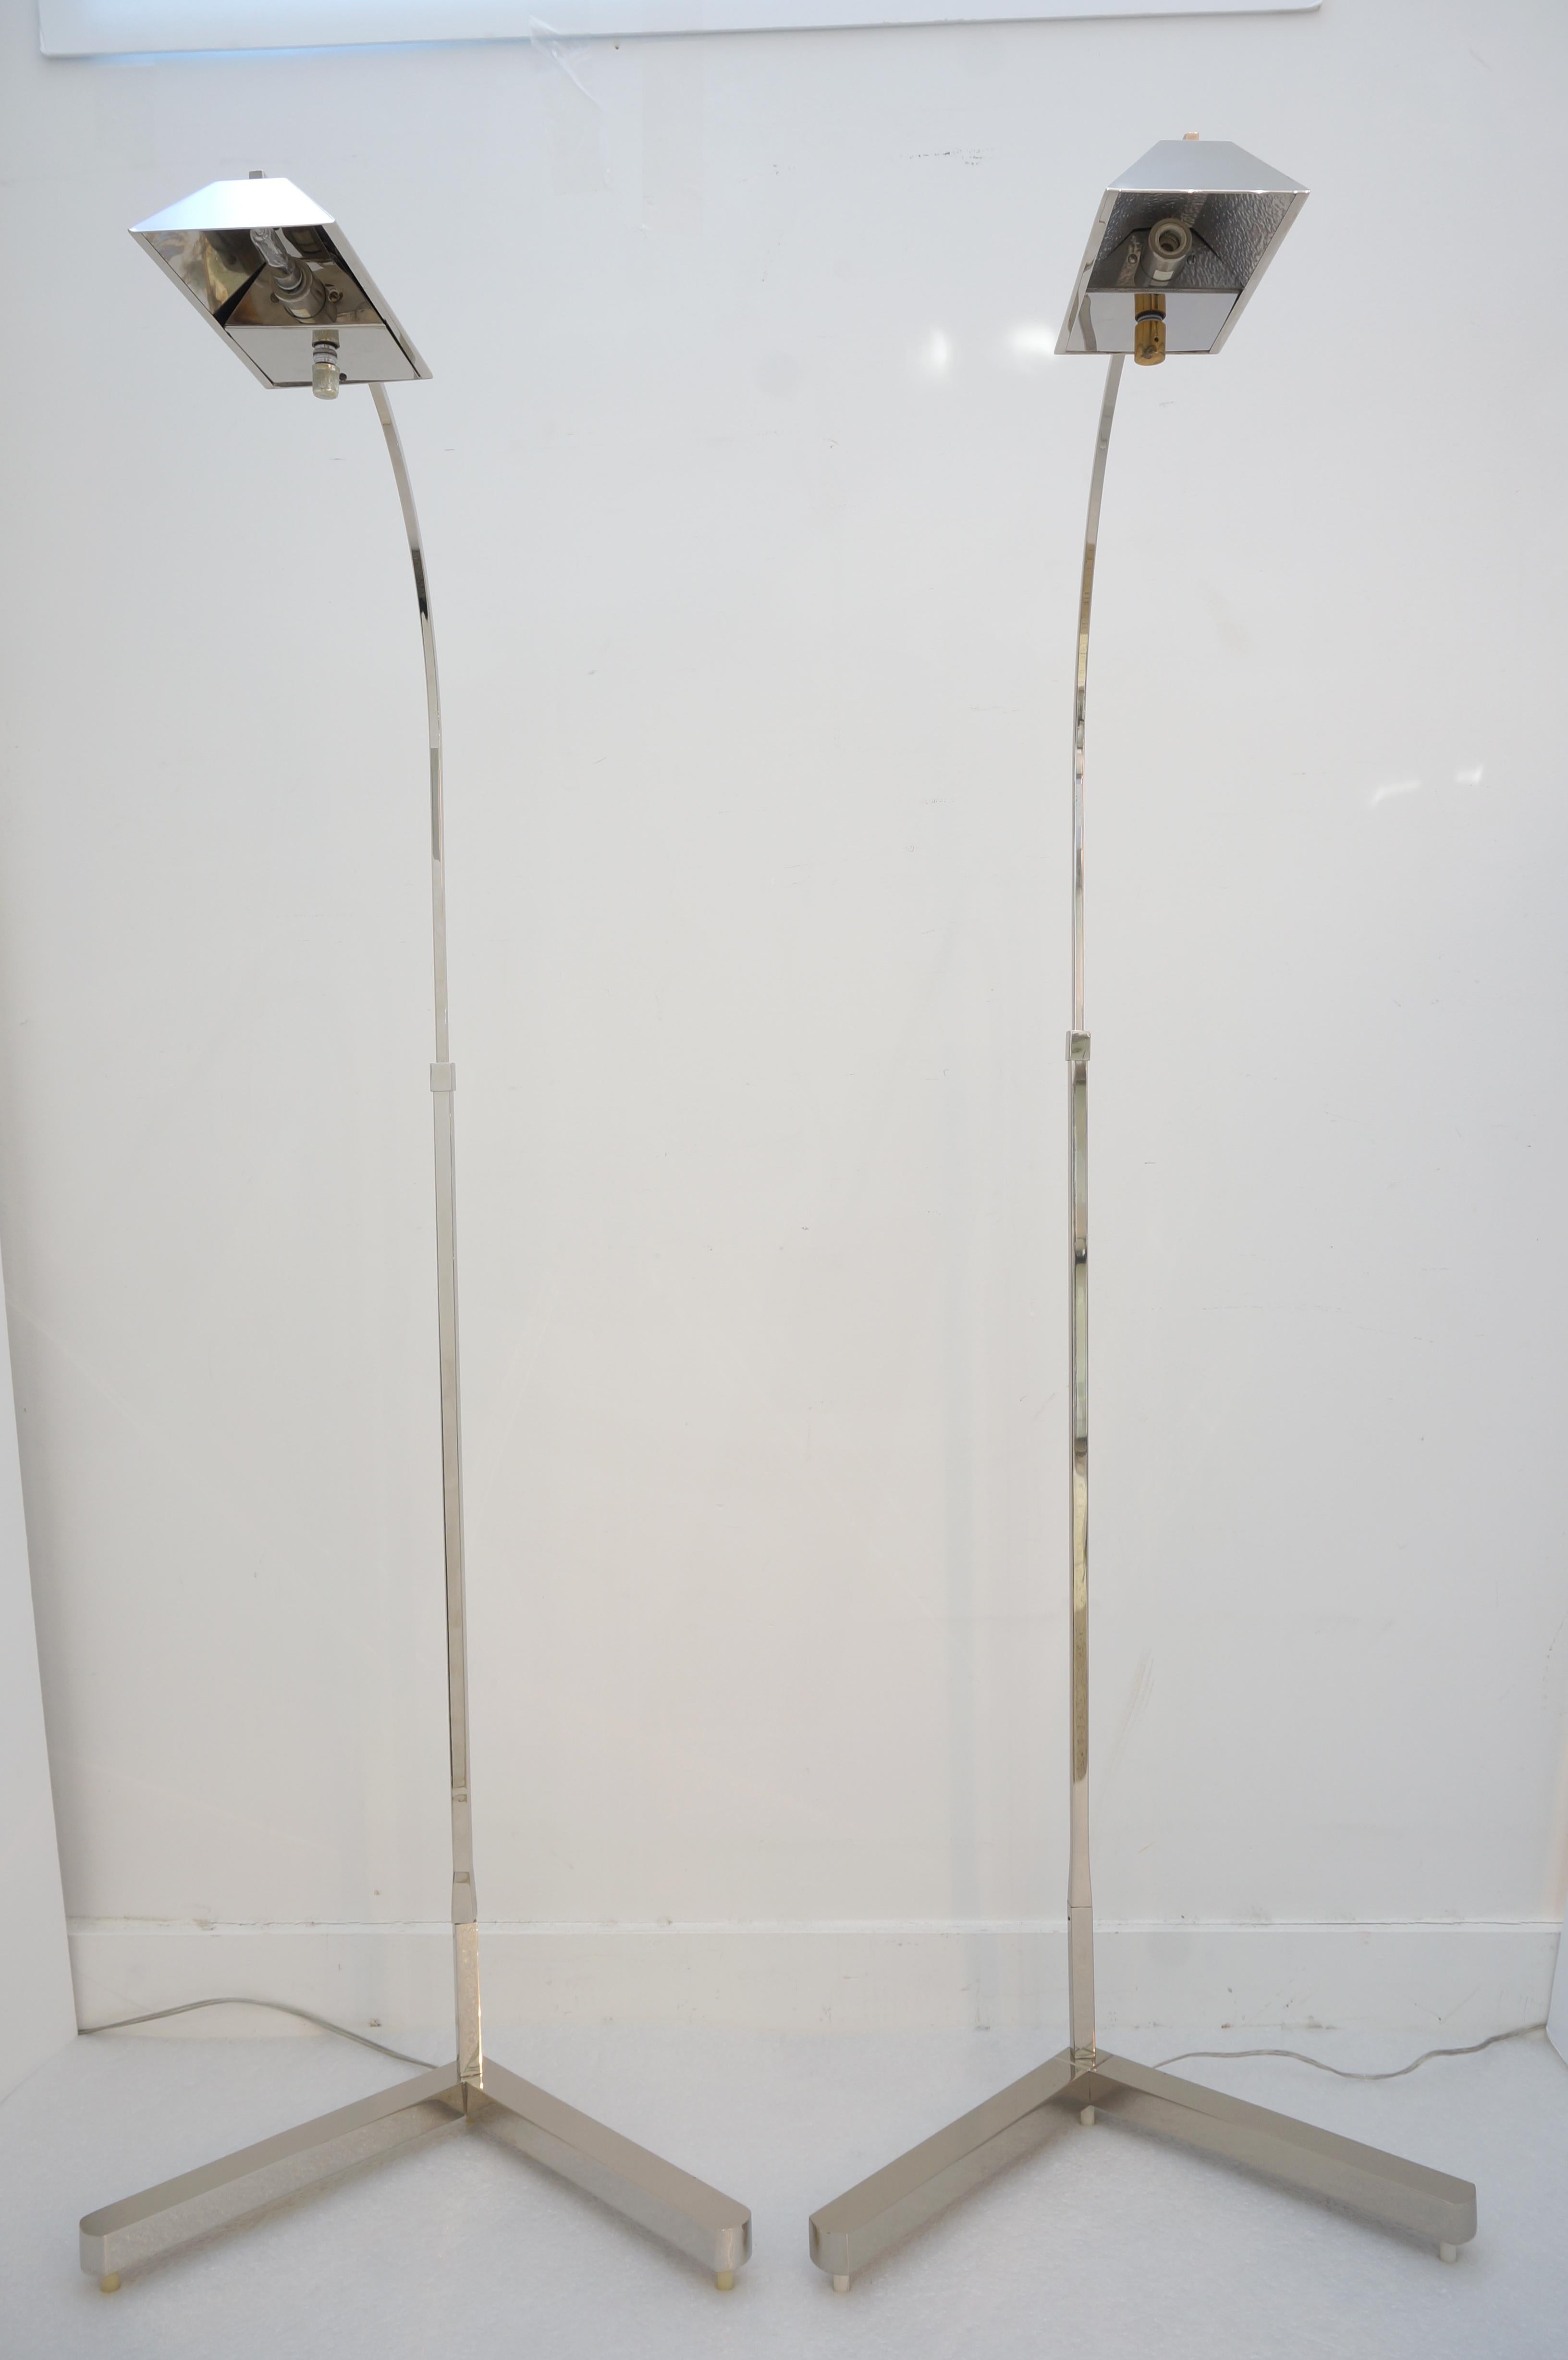 These classic and stylish Casella adjustable floor lamp dates to the late 1990s.

Note: Requires one Edison based regular light bulb.

Note: On the underside of one of the canopies you will see some of the original brass plating.

Note: These